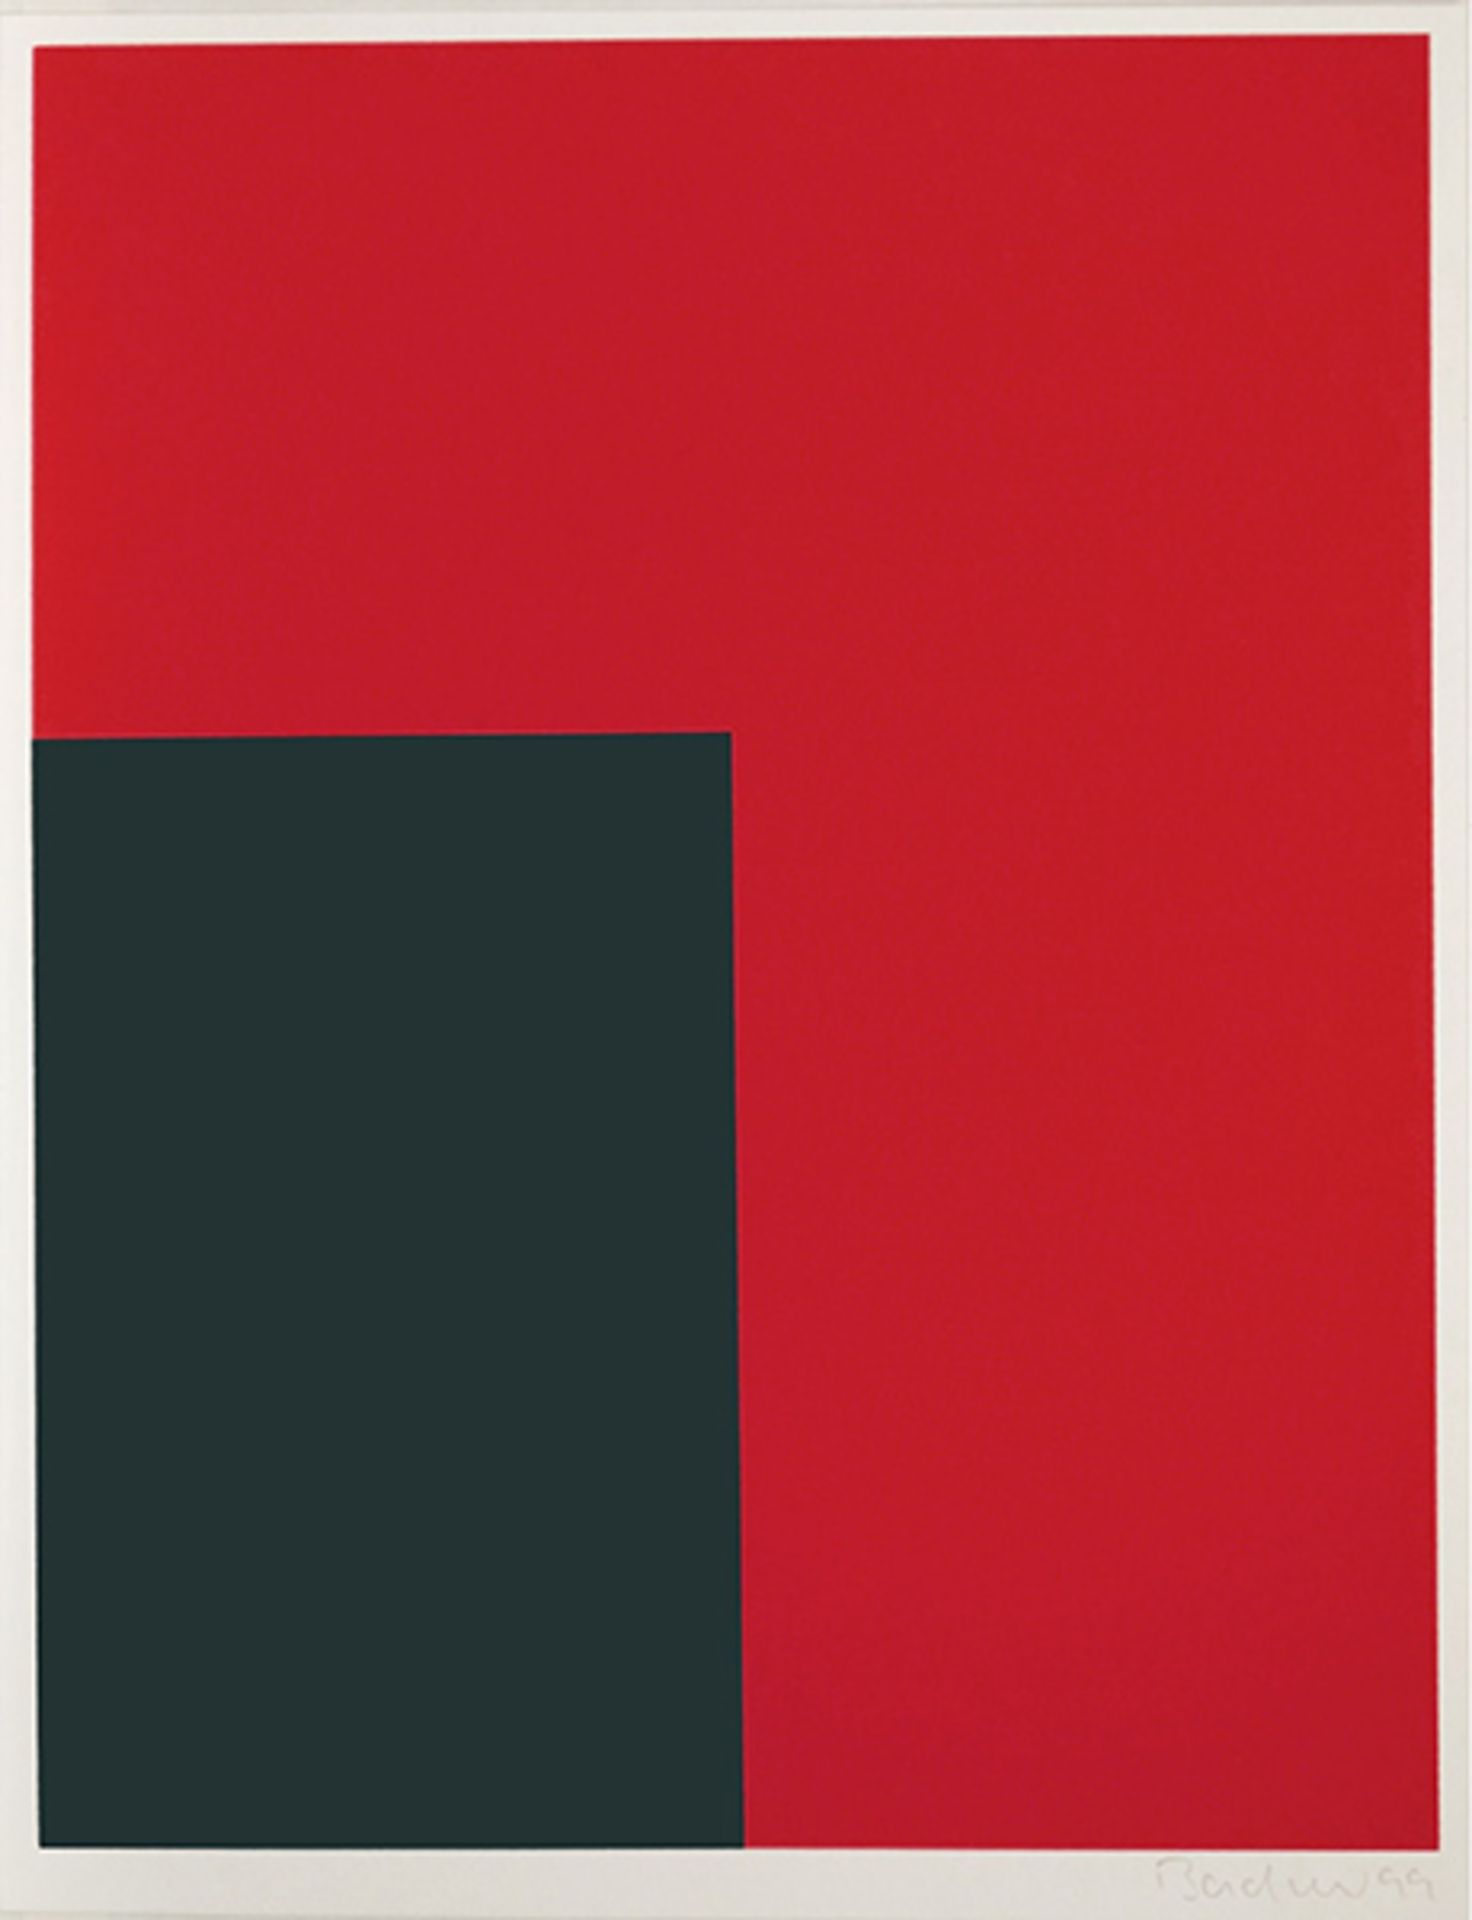 Ohne Titel (1999)Colour serigraphy in red and gray on hand made paper. Signed and dated. Sheet size: